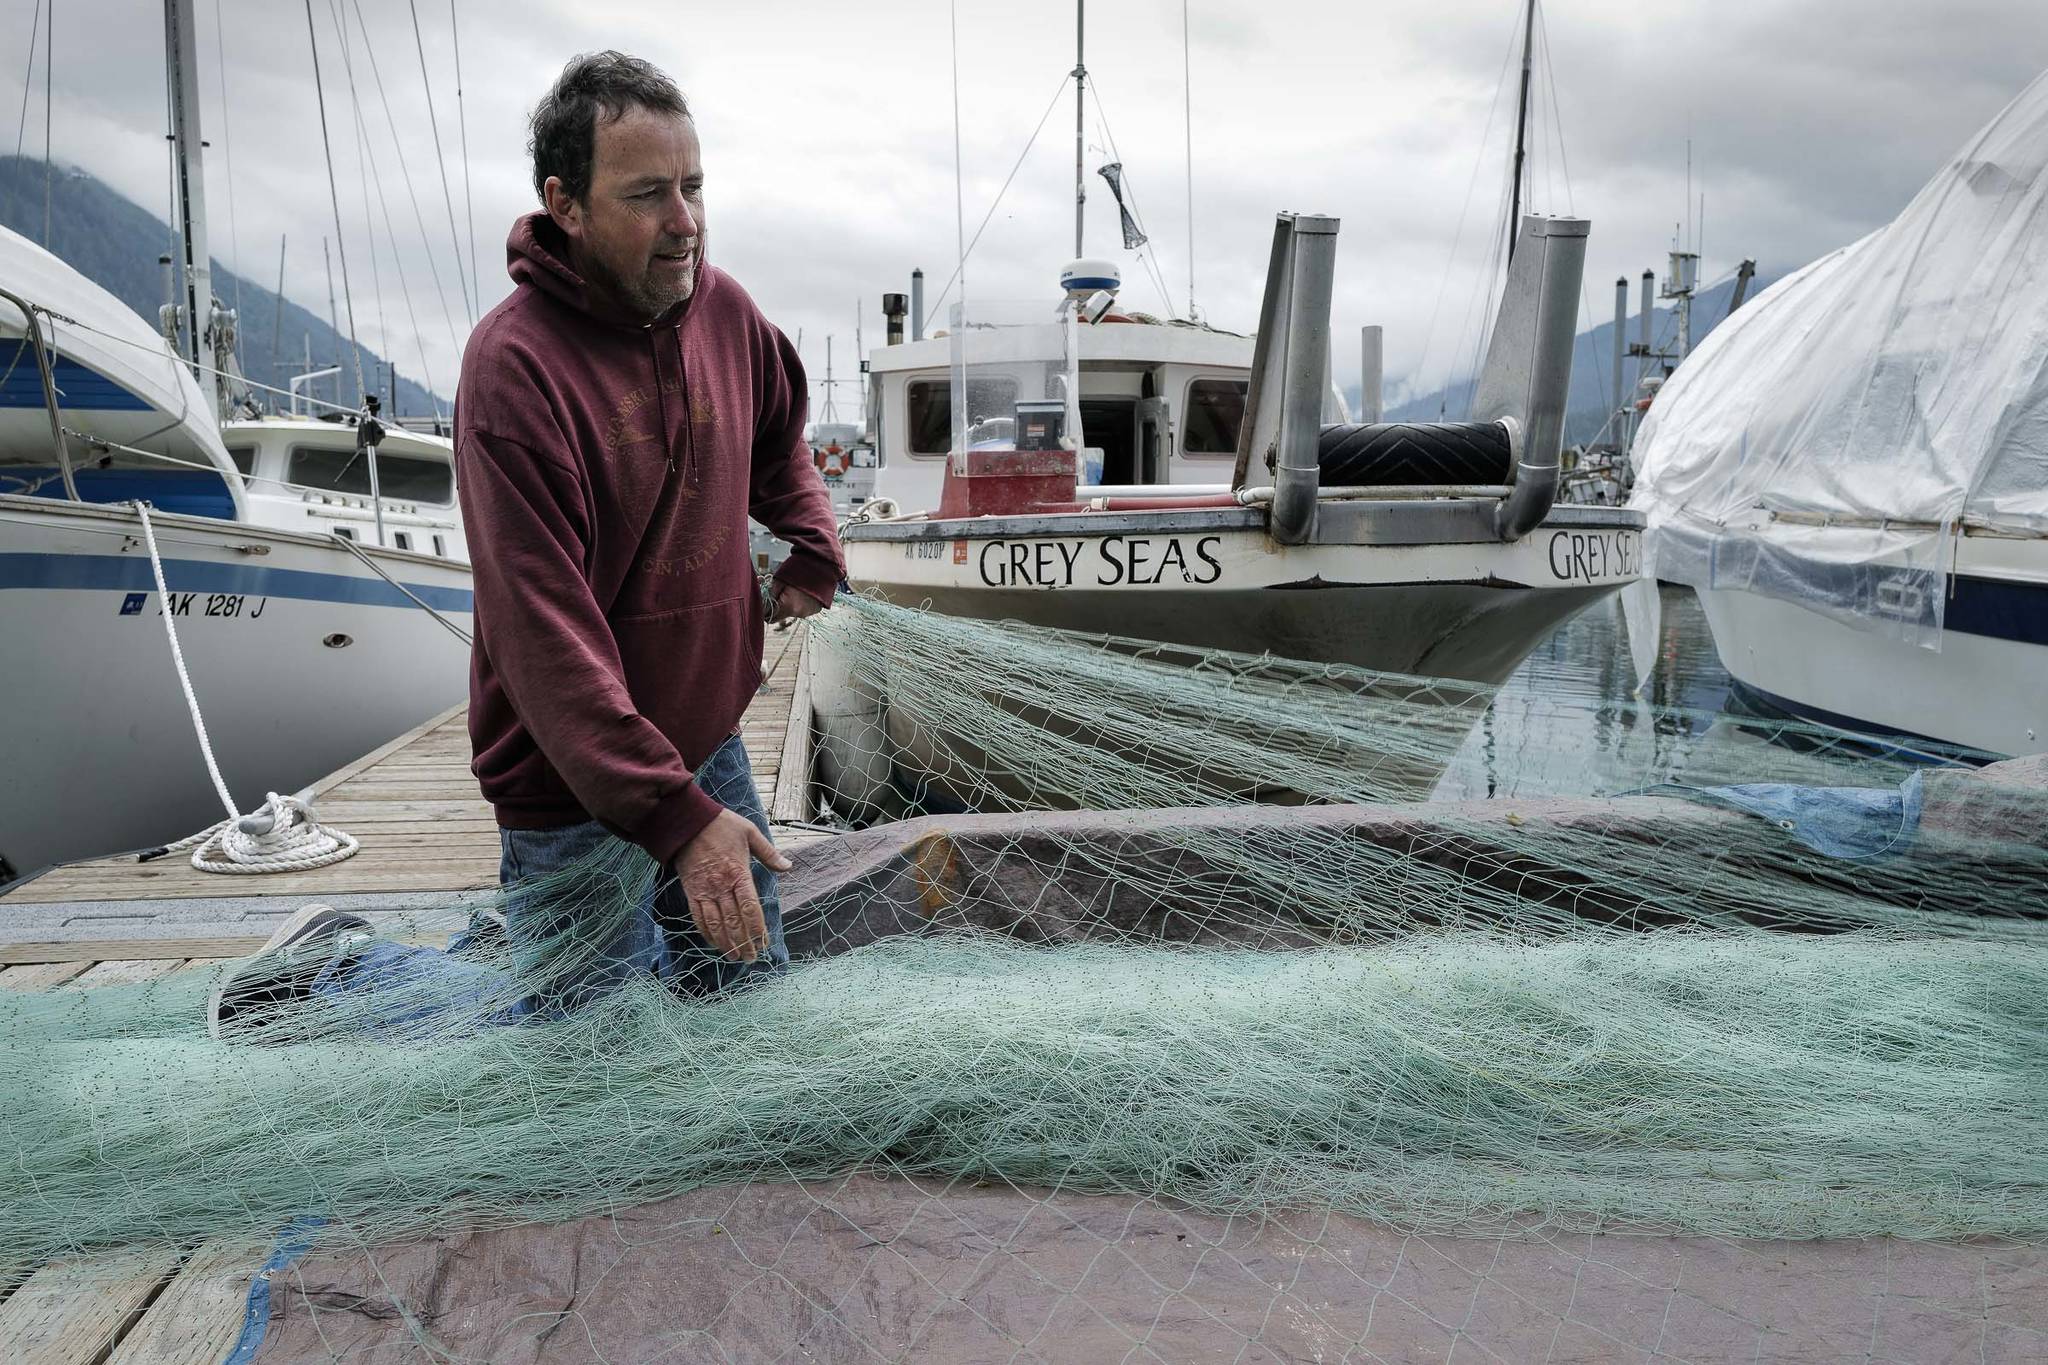 Albert McDonald works on his salmon gillnet in front of his bowpicker “Grey Seas” at Aurora Harbor on Friday, July 12, 2019. McDonald worked as a deckhand for 20 years before buying his own boat in 2003. He said he mainly fishes in Taku Inlet. (Michael Penn | Juneau Empire)